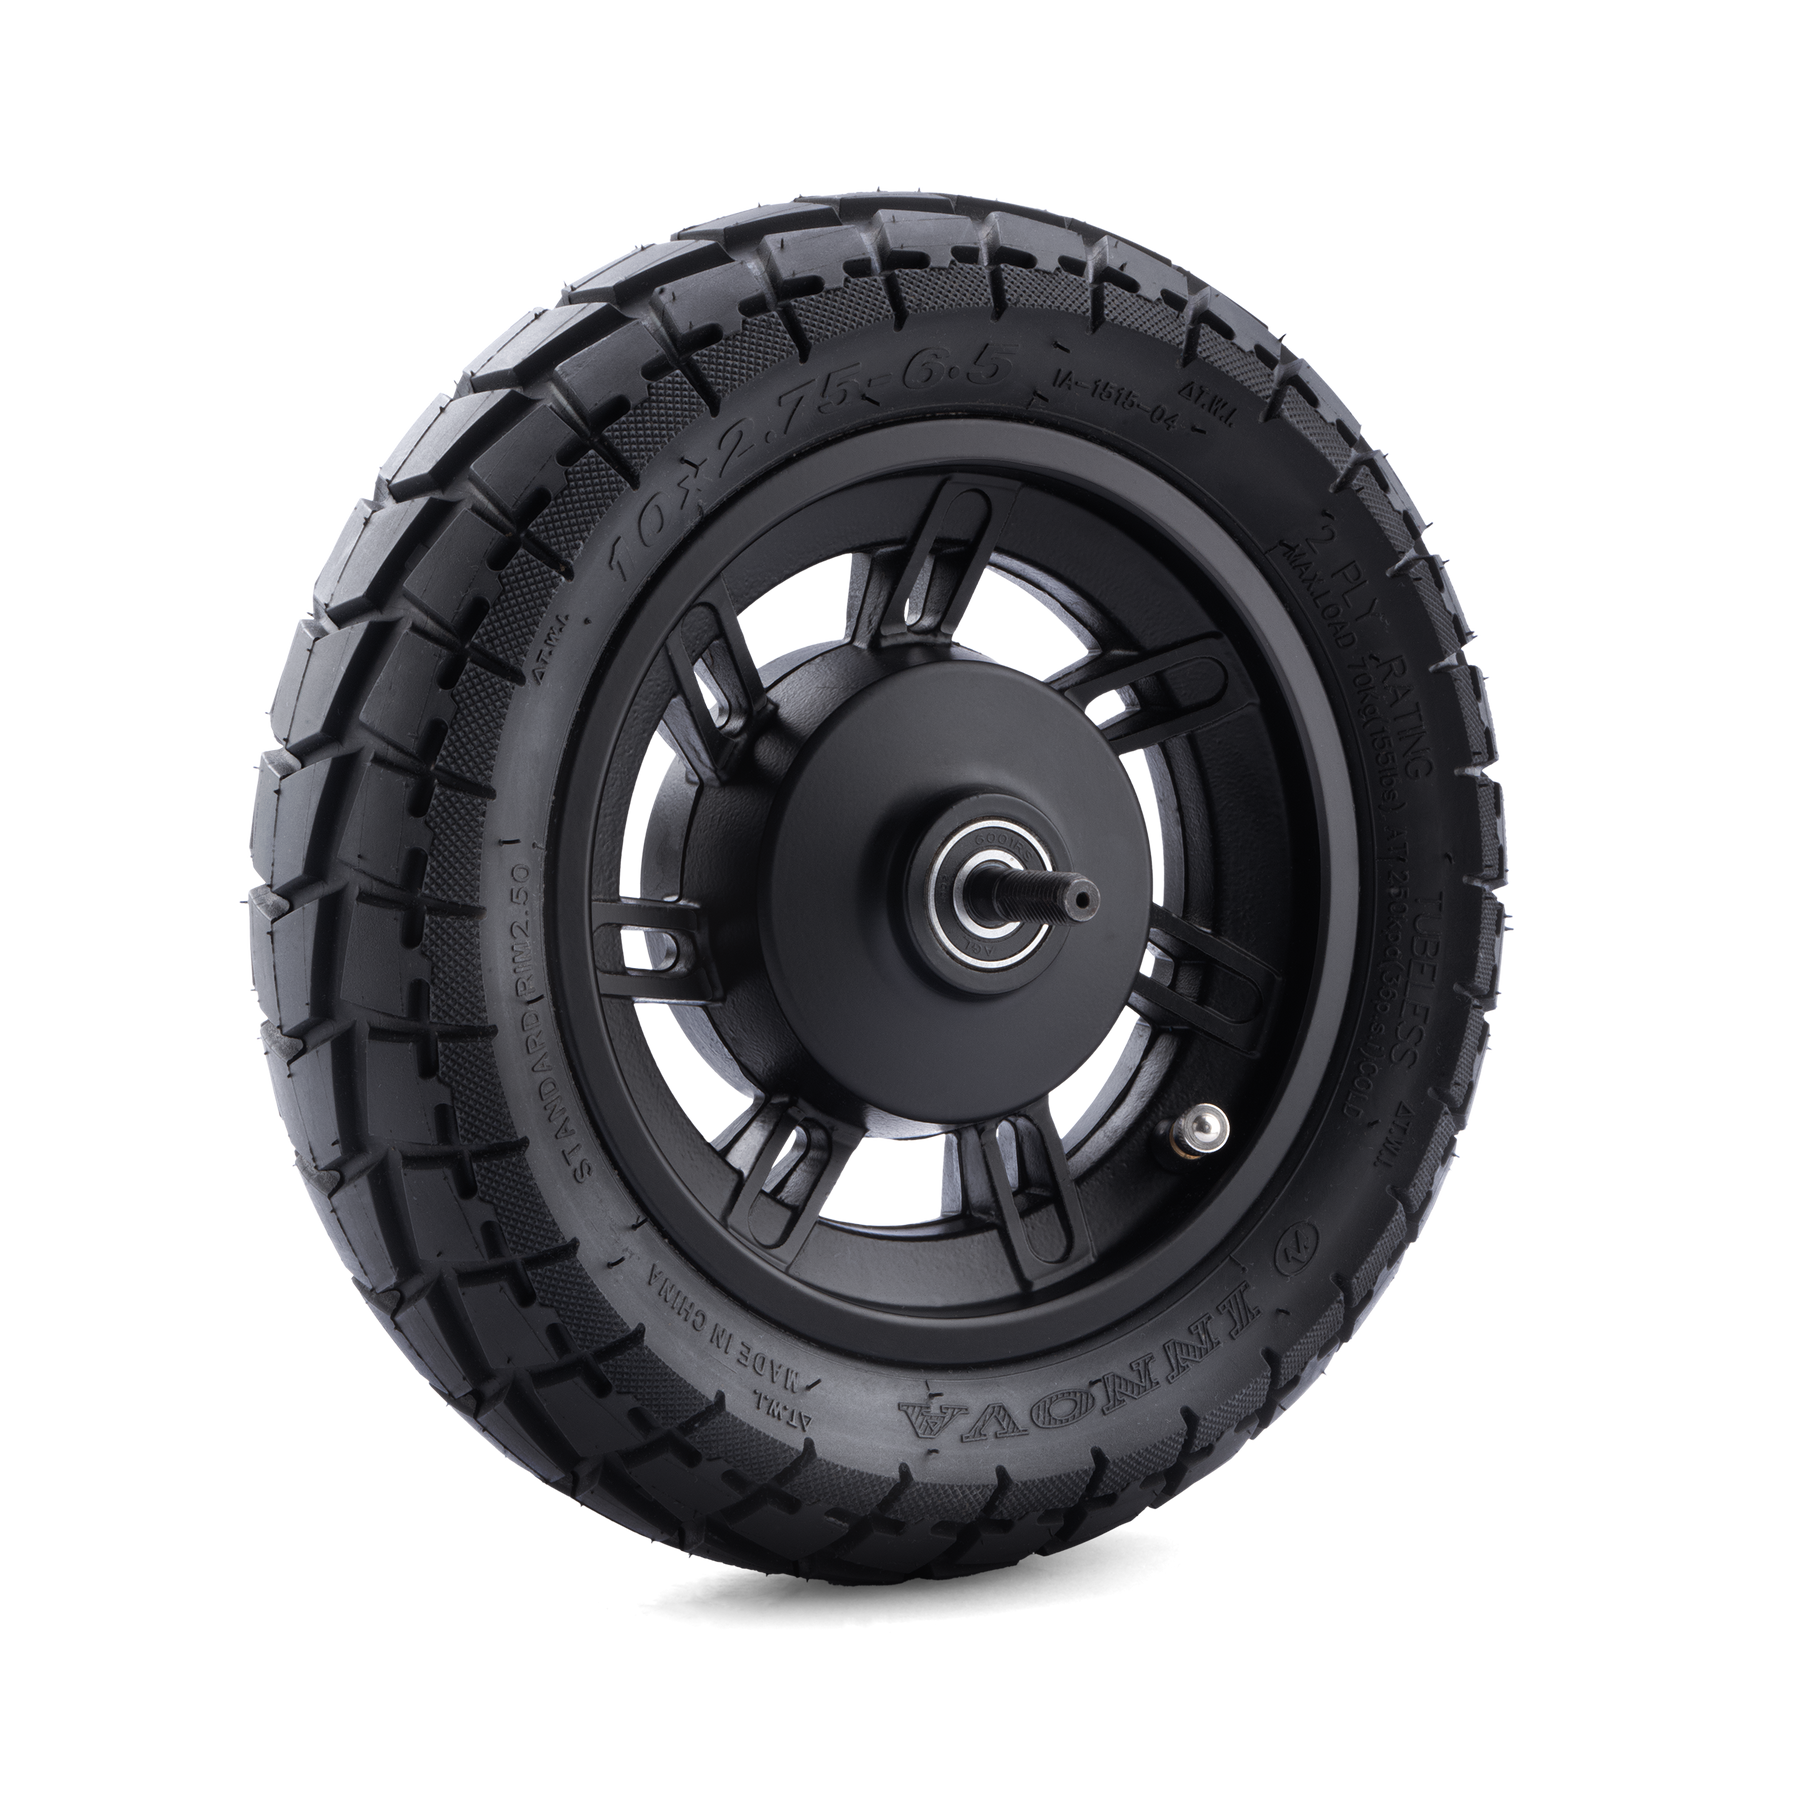 Rim including tires 10" with off-road profile